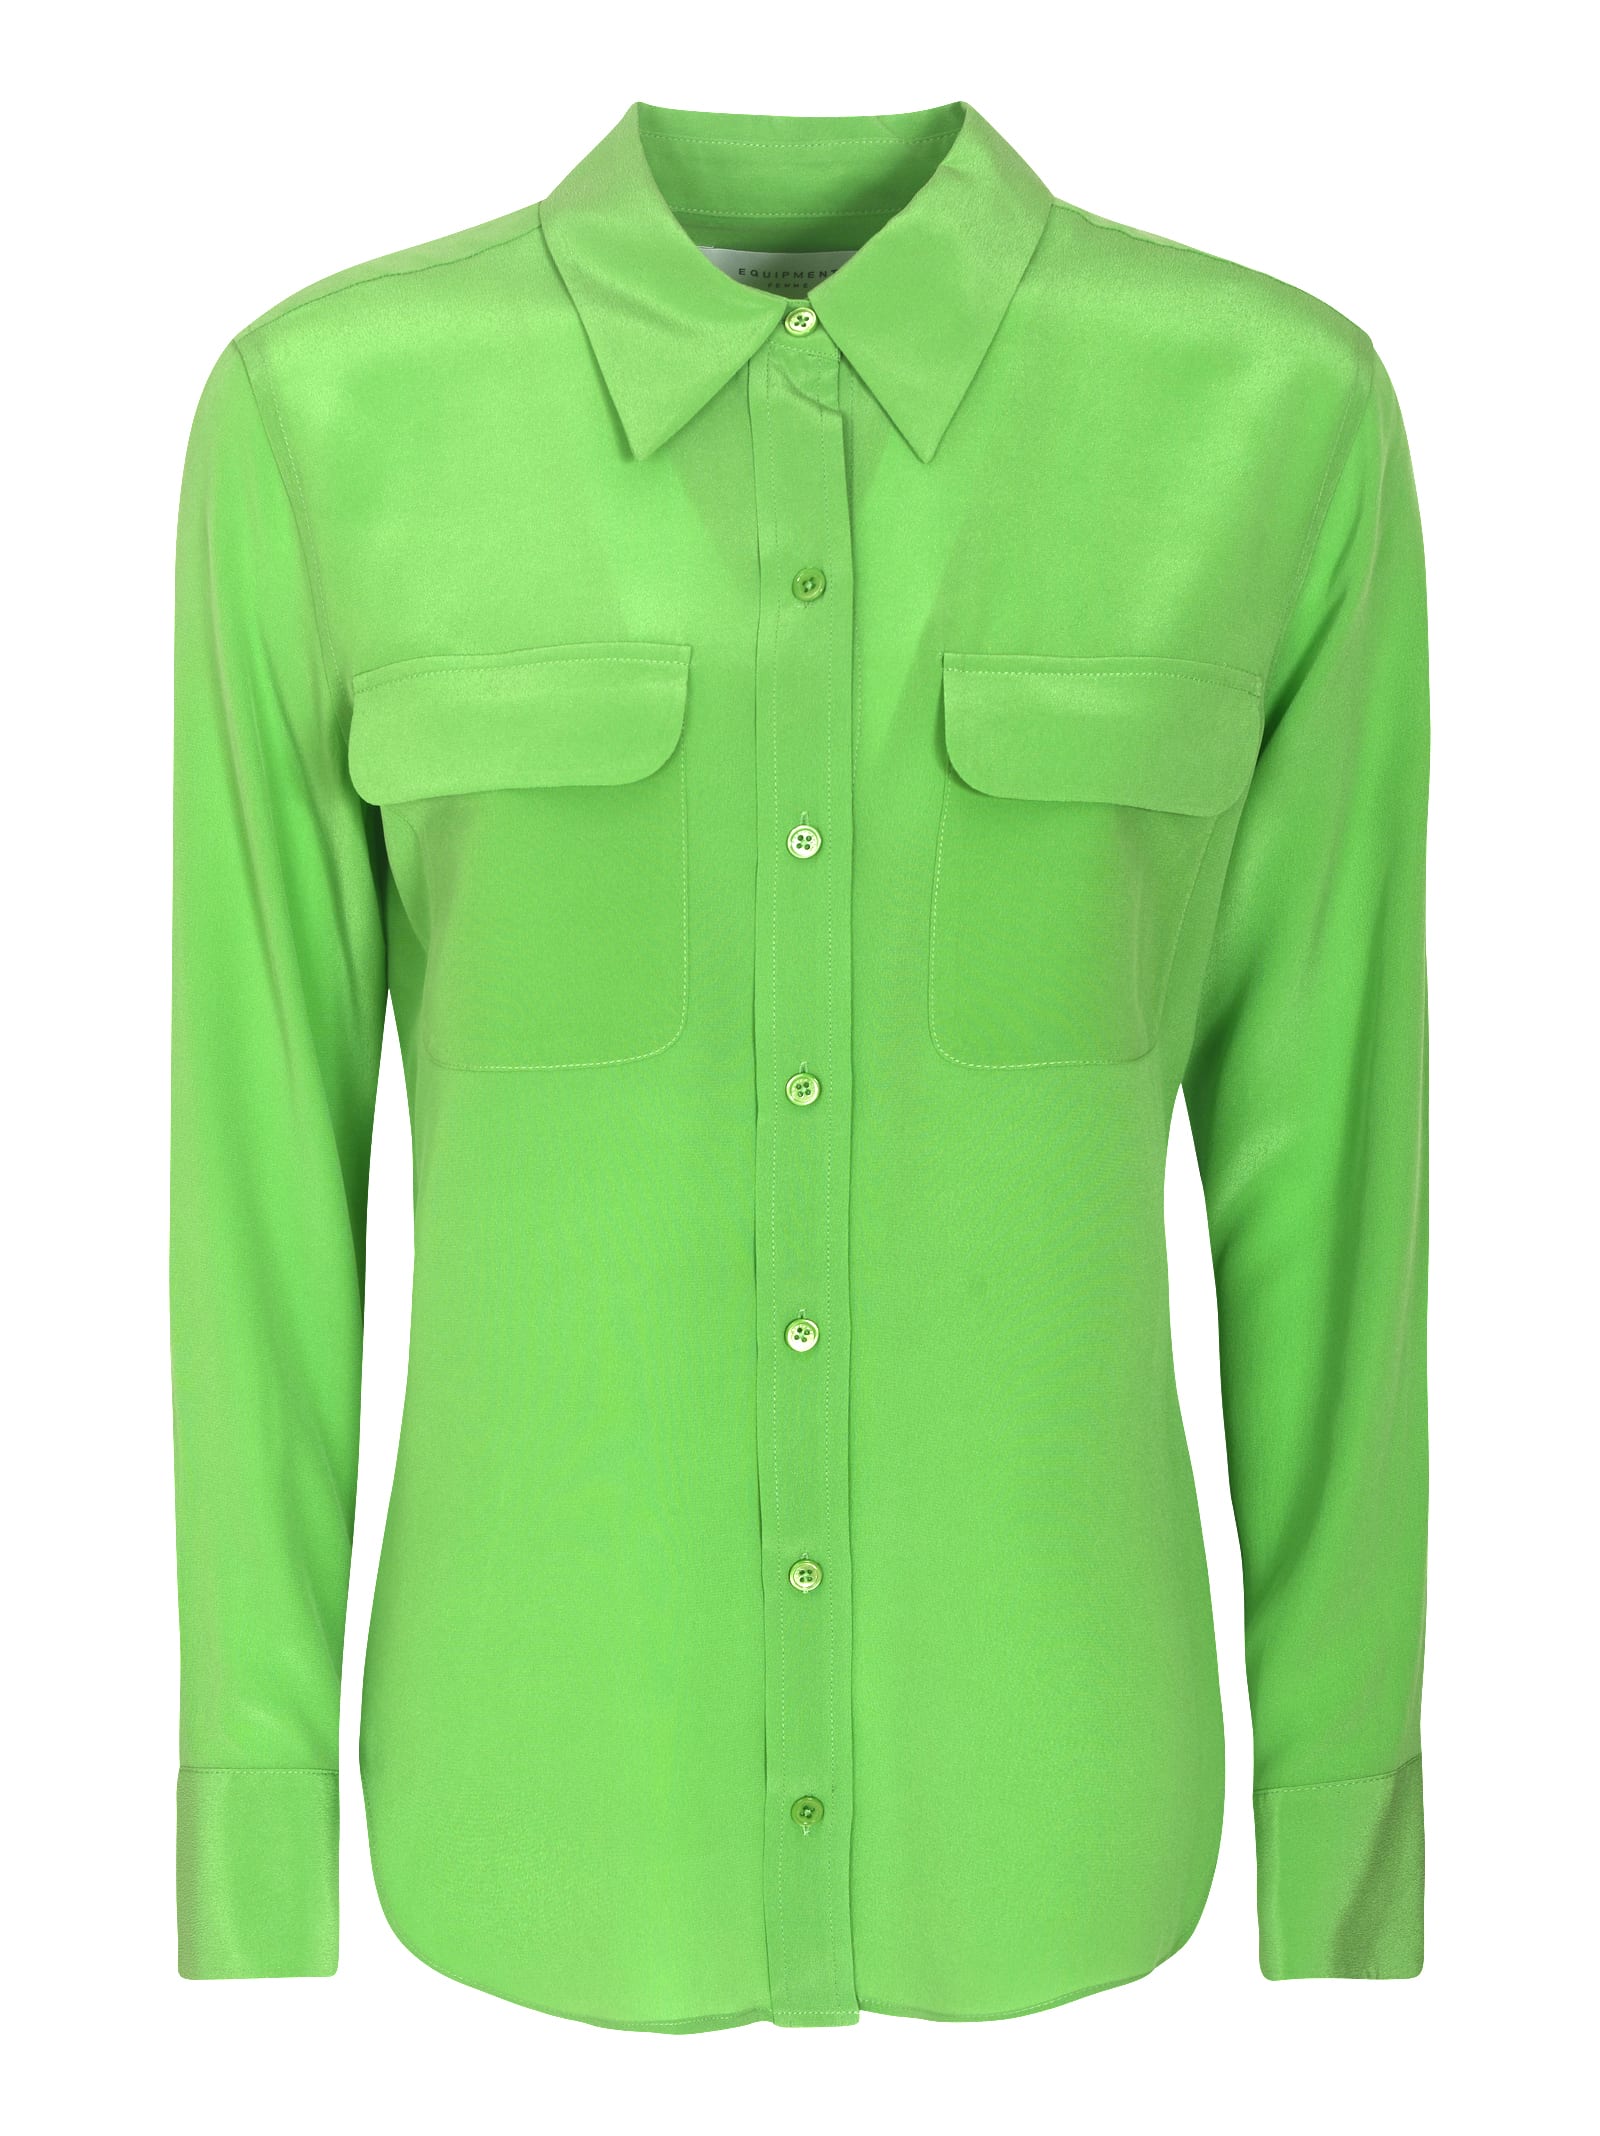 Equipment Round Hem Patched Pocket Plain Shirt In Vibrant Green